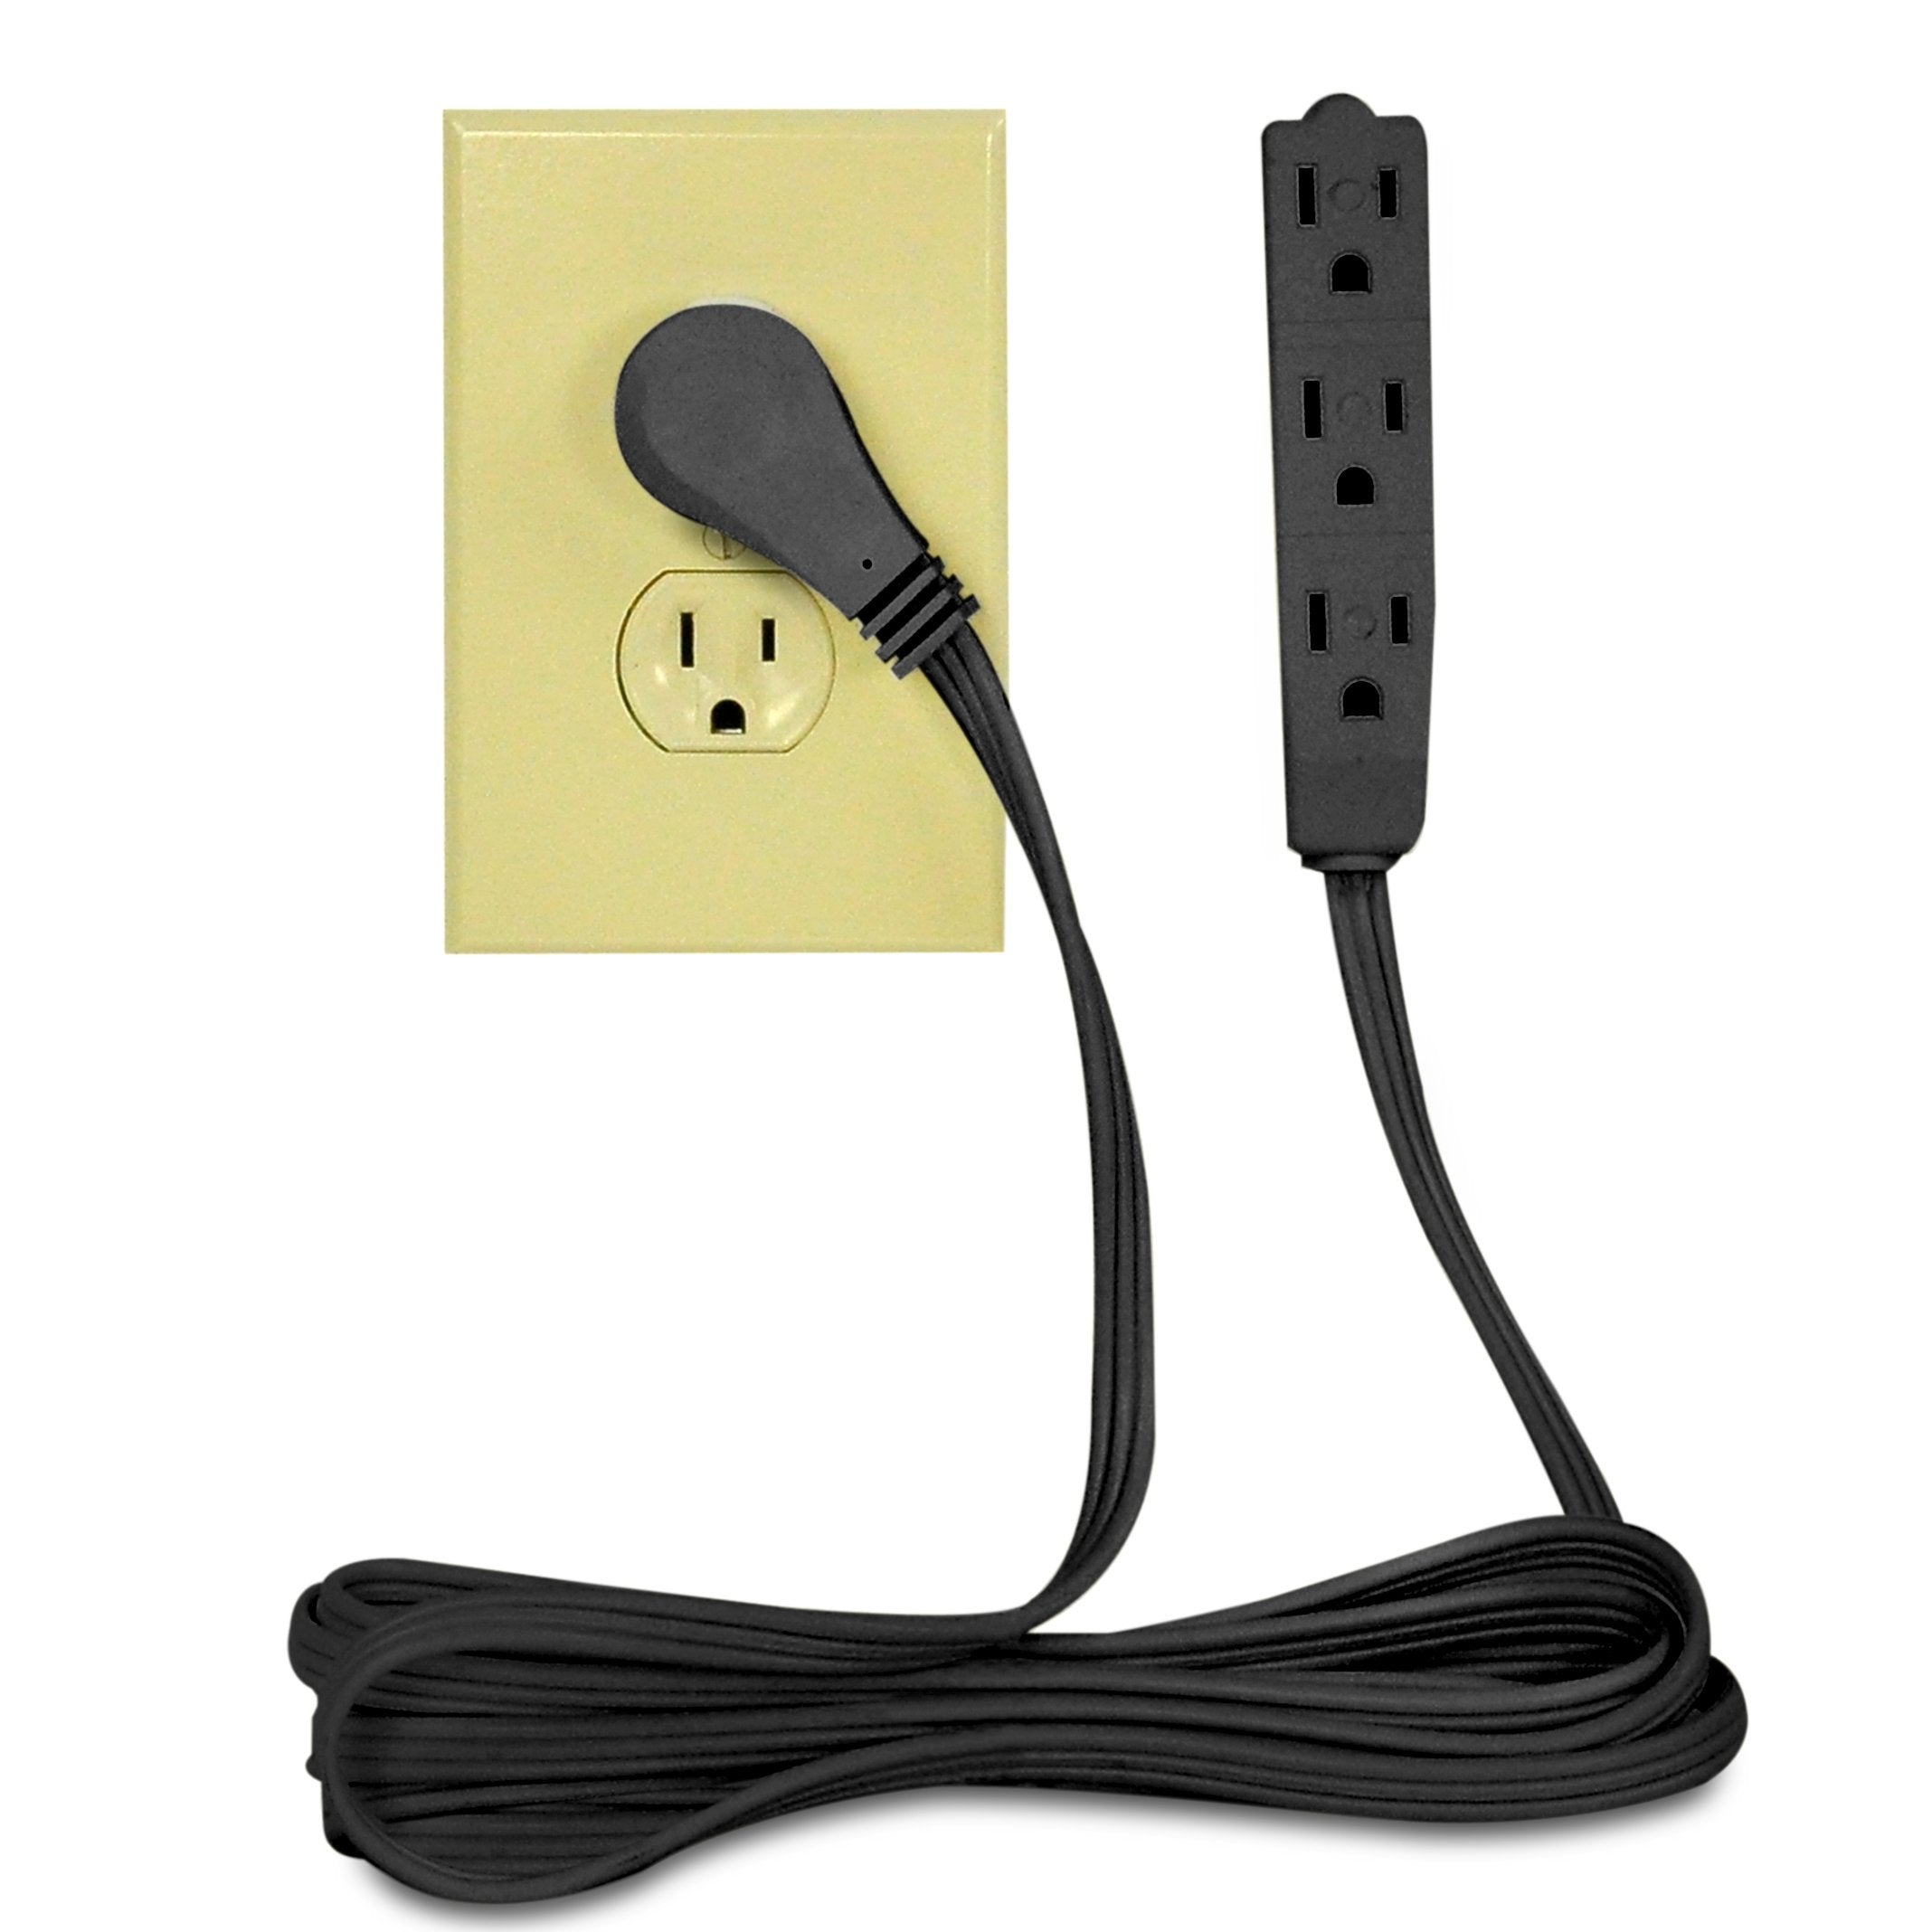 BindMaster 10 Feet Extension Cord/Wire, 3 Prong Grounded, 3 outlets, Angled Flat Plug, Black (3 Pack)  - Like New